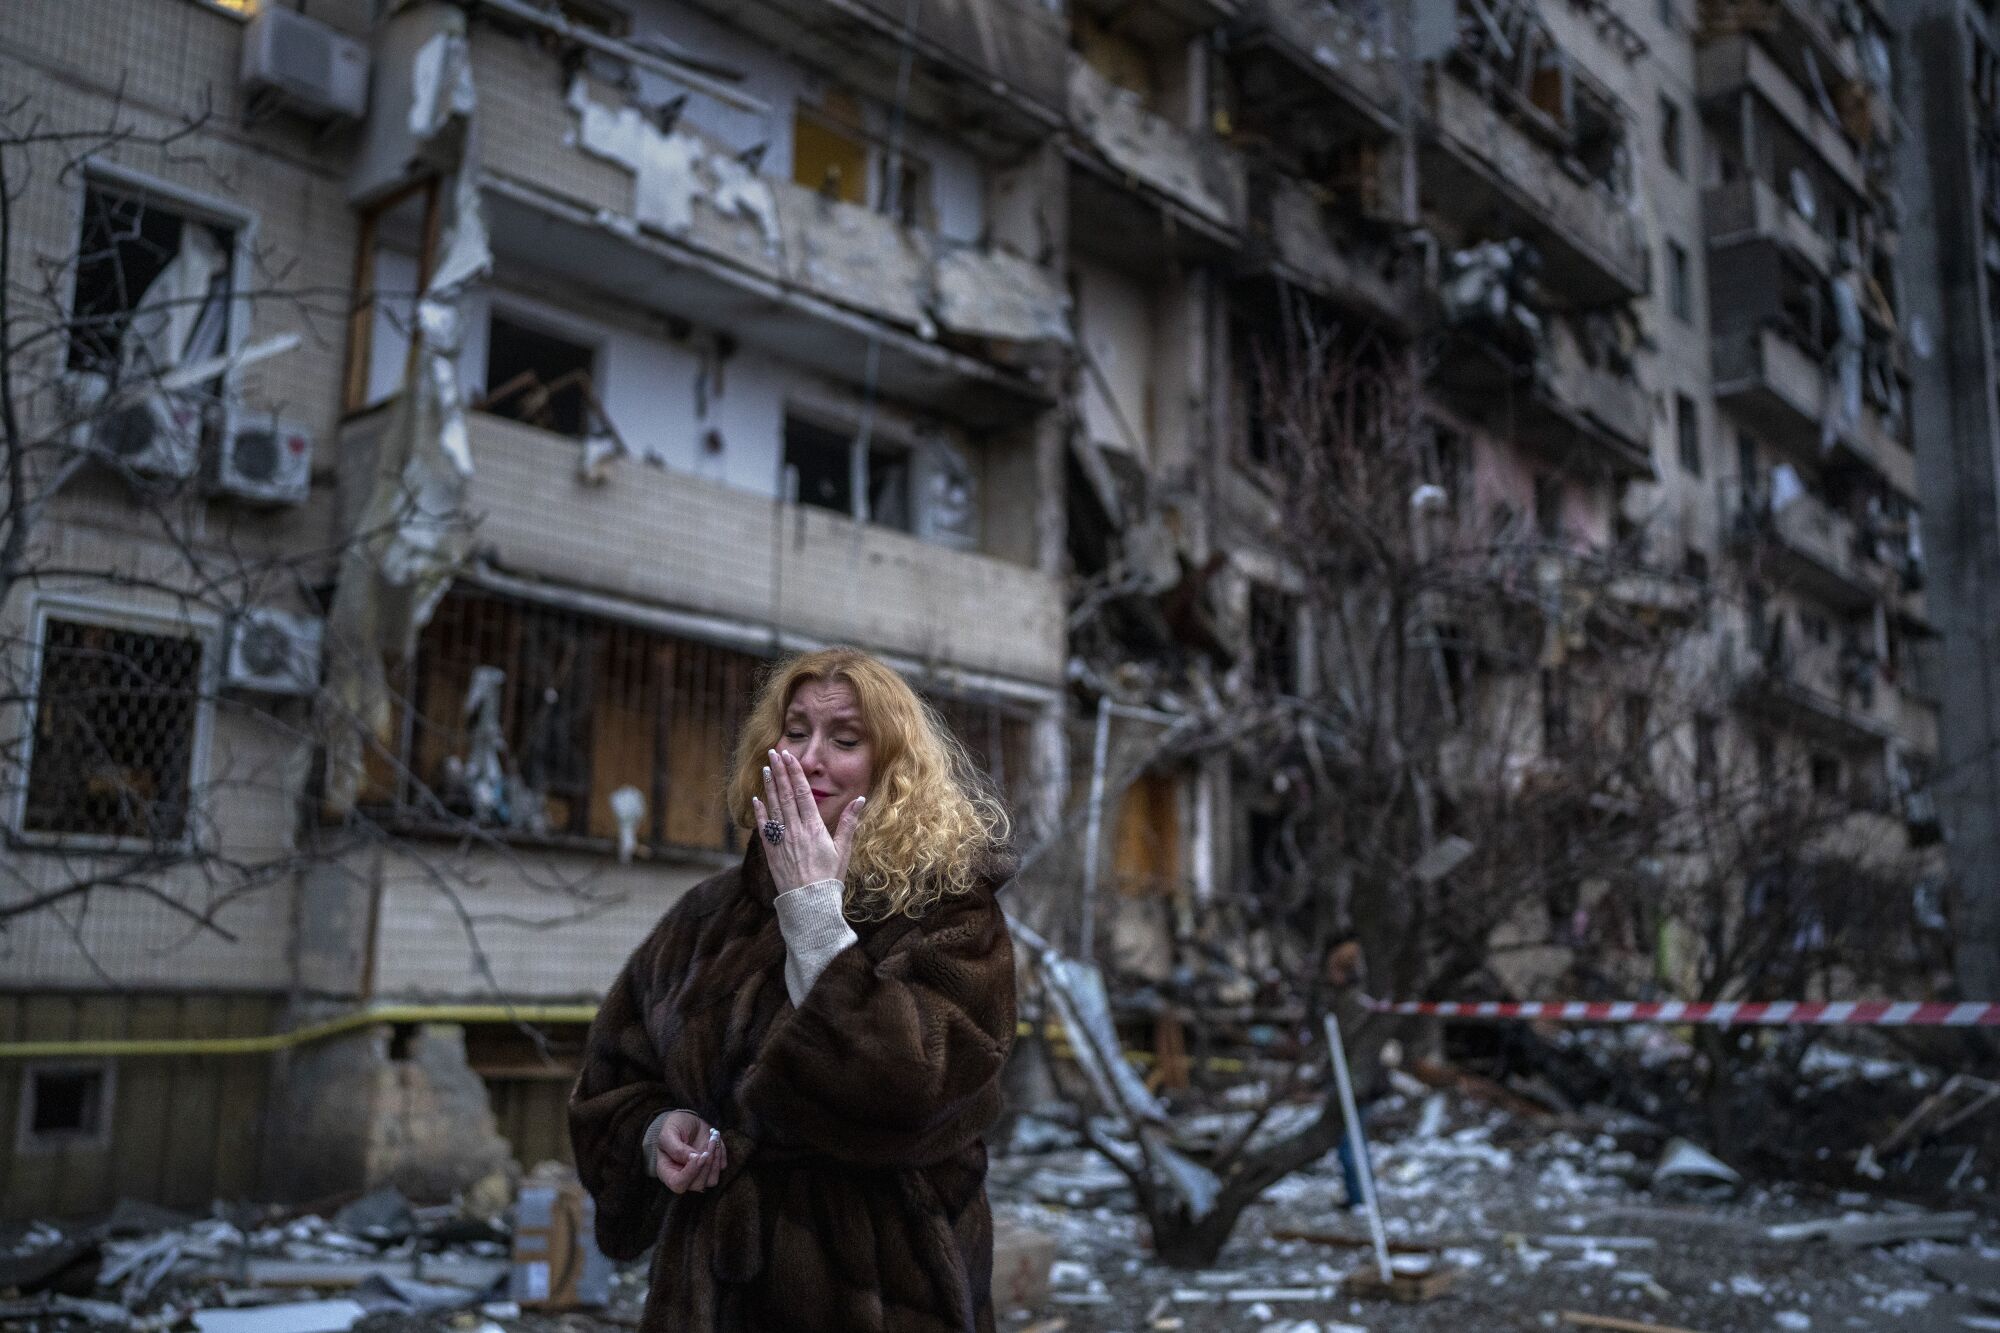 Natali Sevriukova reacts next to her house following a rocket attack.